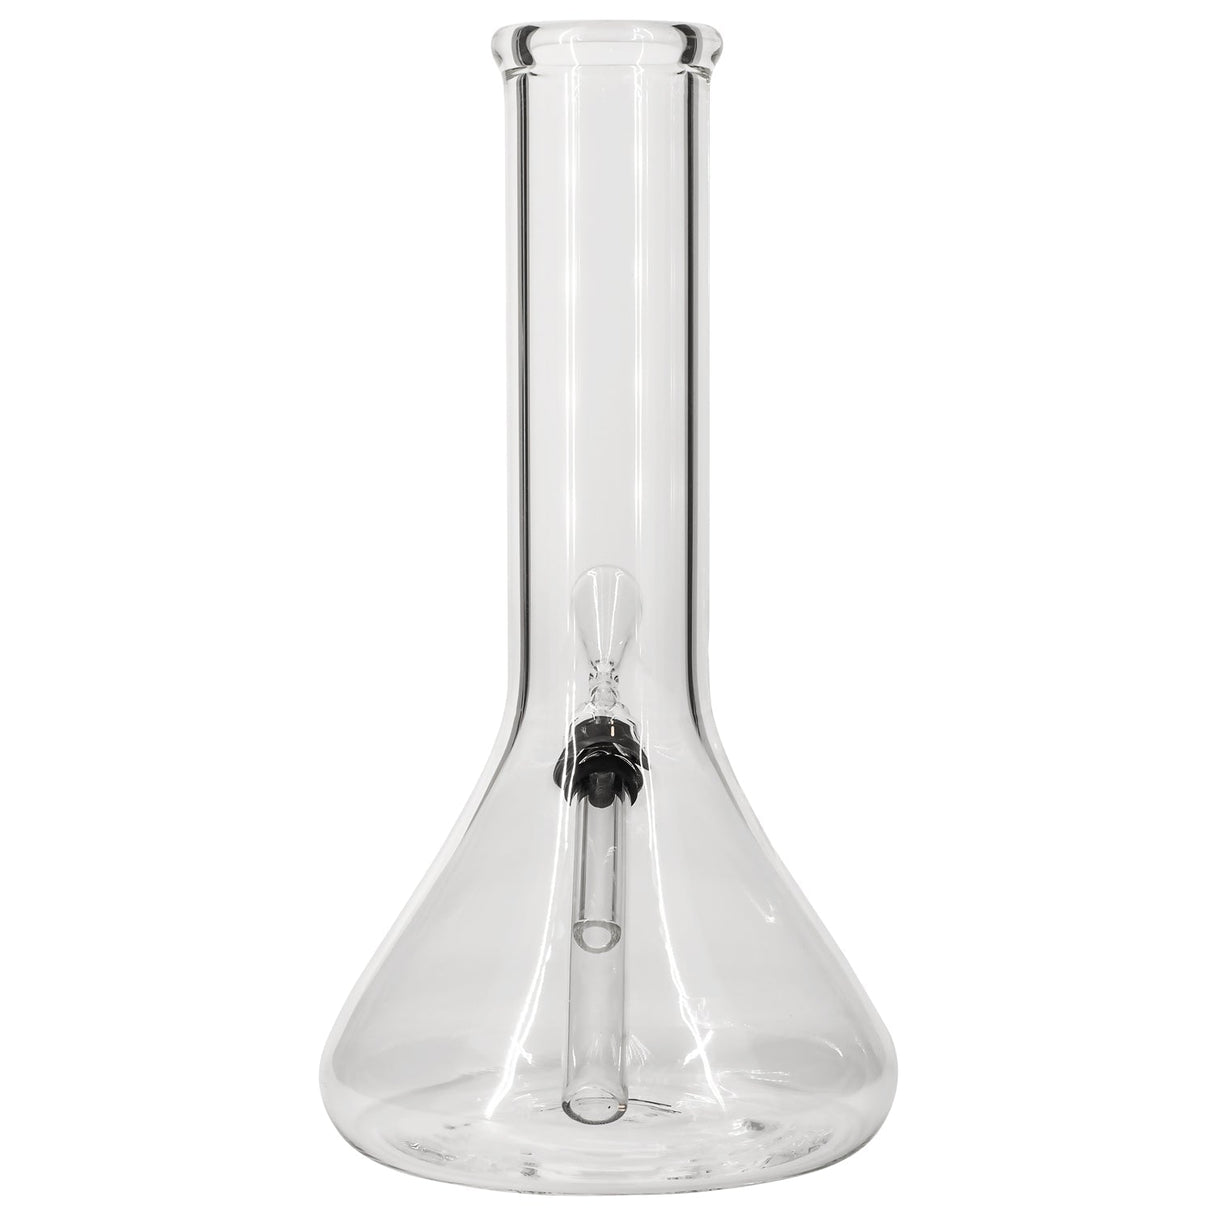 LA Pipes Thick Borosilicate Glass Beaker Base Bong, 8-9" with 45 Degree Grommet Joint - Front View